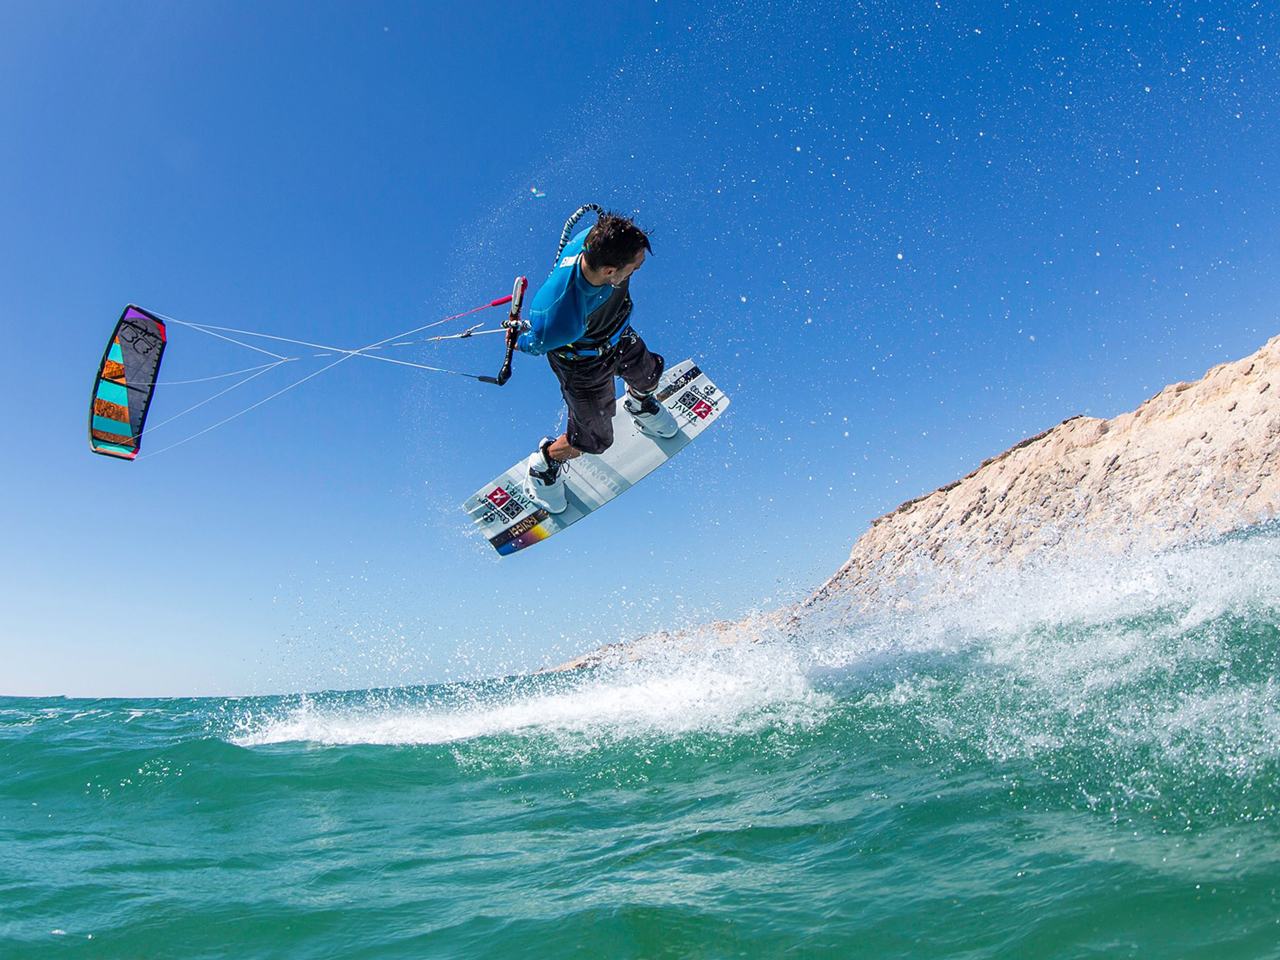 kitesurf wallpaper image - Youri Zoon with a very low handlepass - in resolution: Standard 4:3 1280 X 960